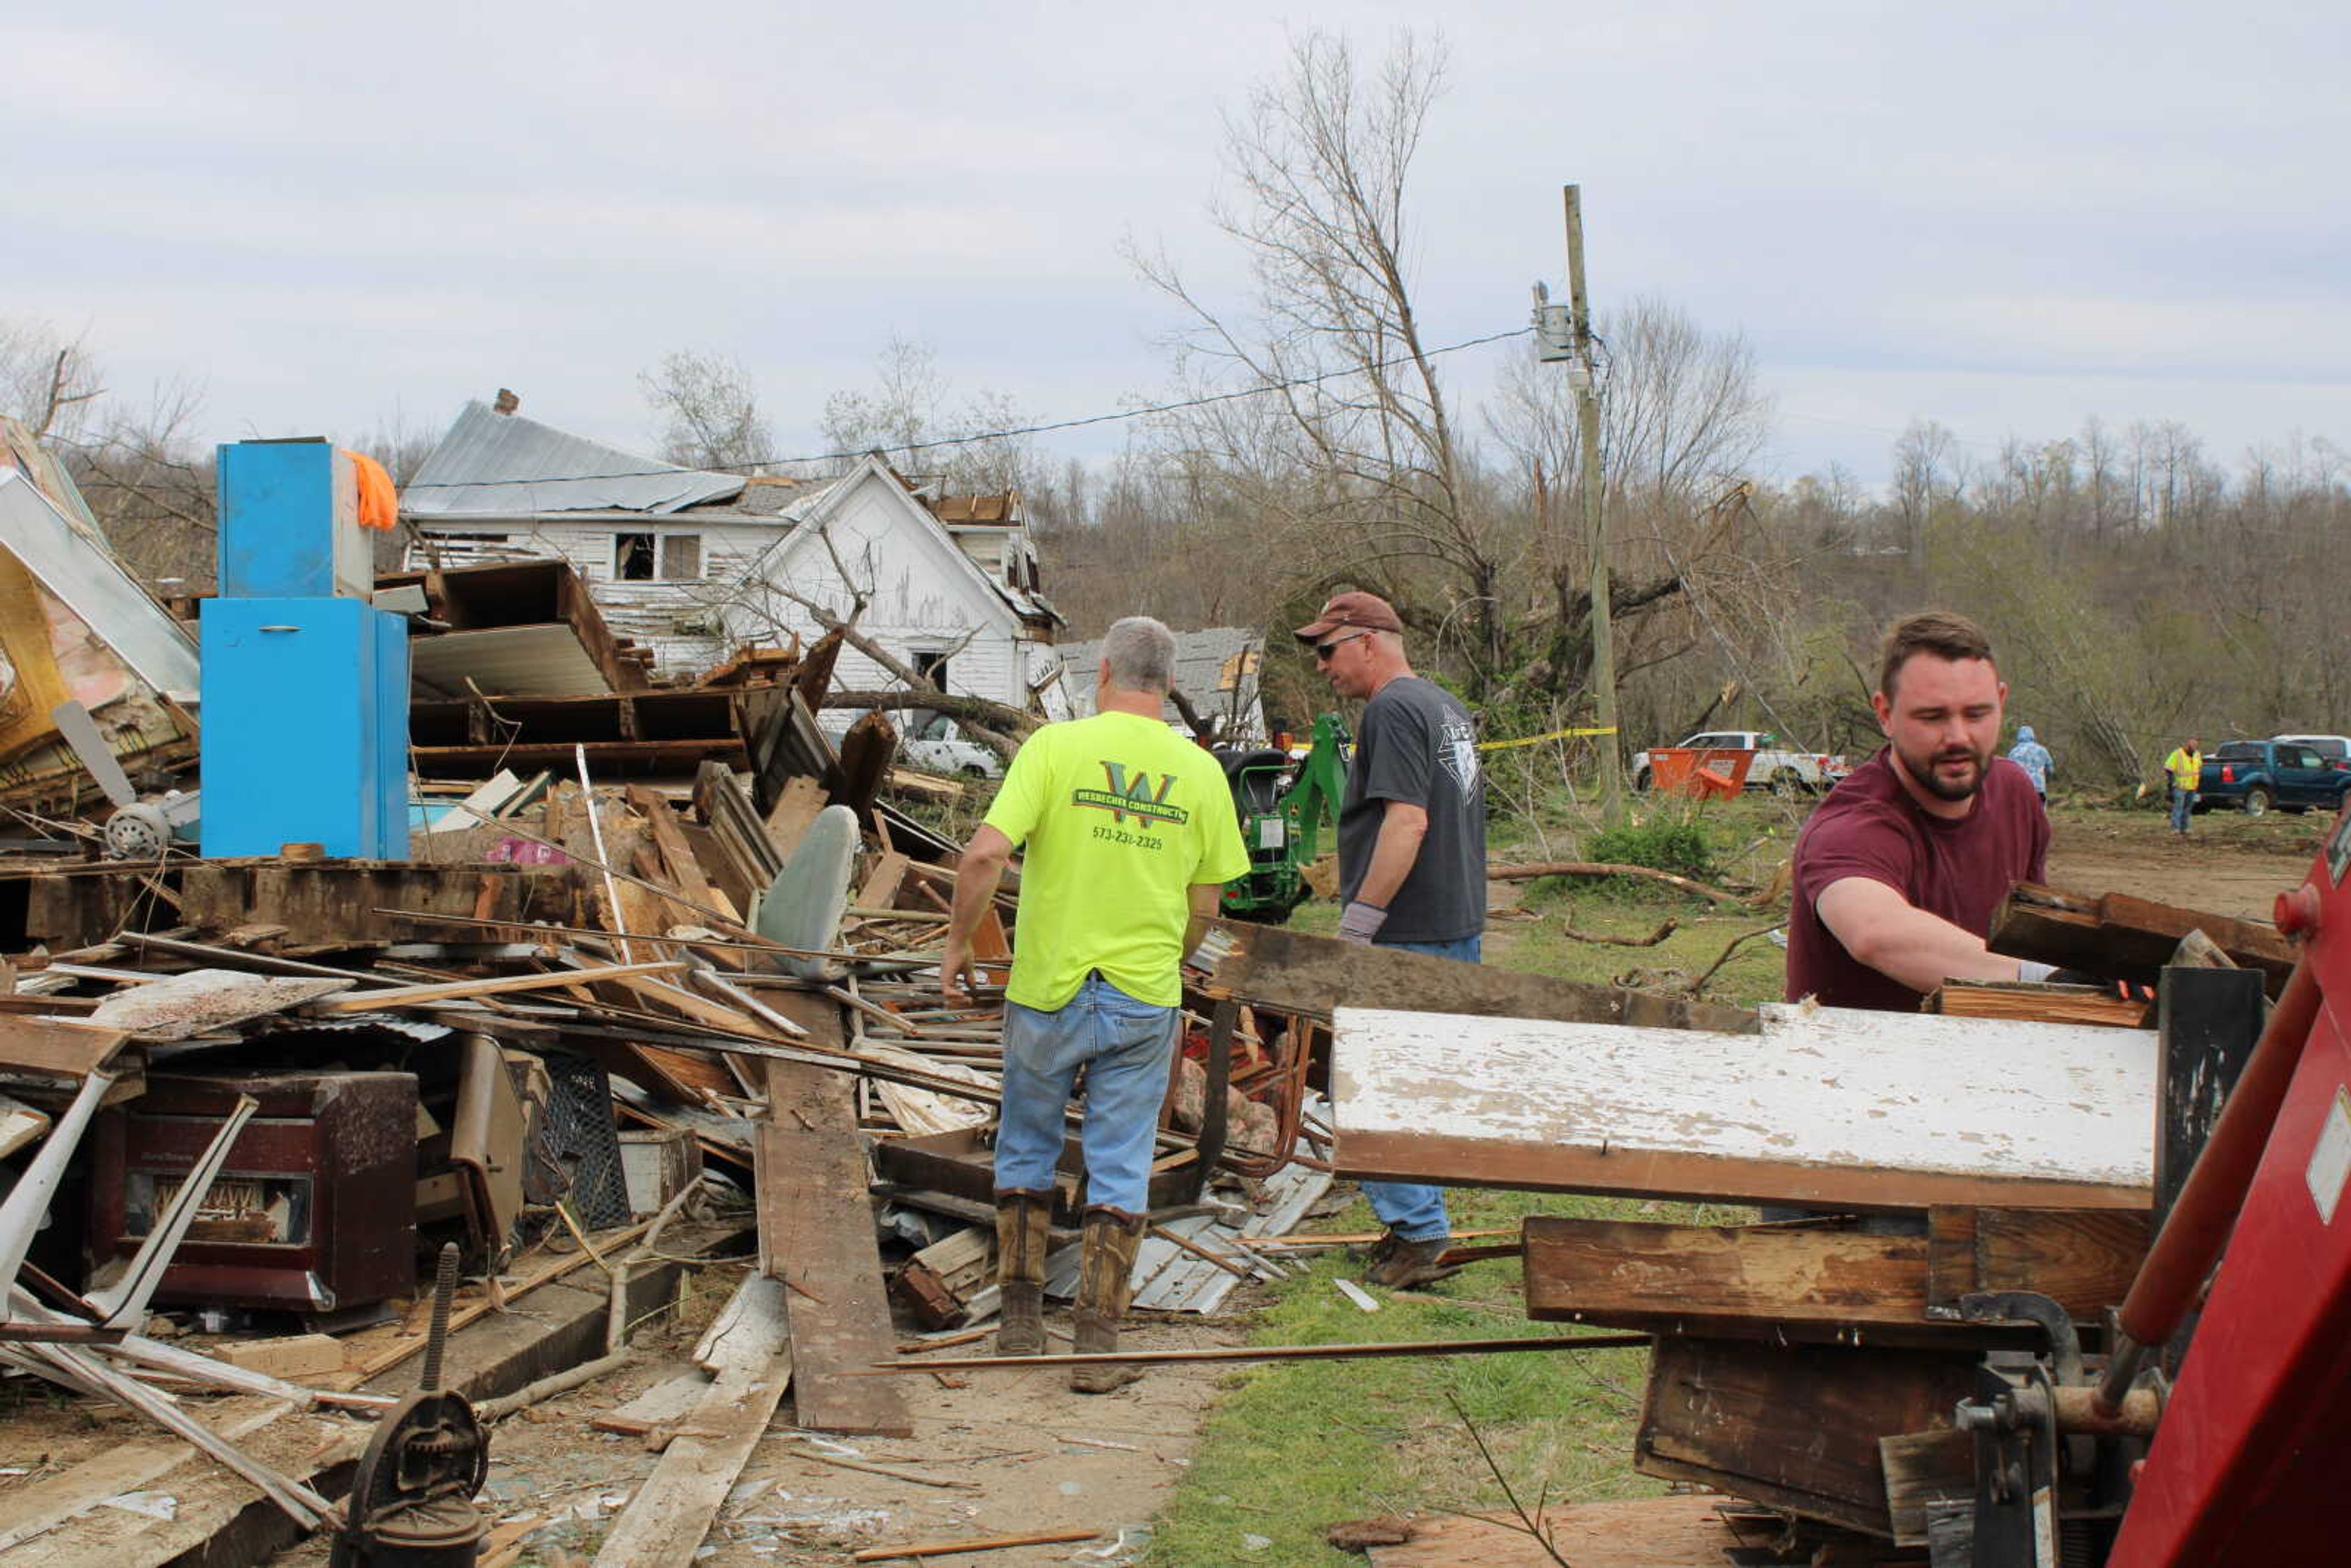 Joshua Wells (front) helps Phil Stanfill (left) and Tony Jansen (right) remove a wall from the Stanfills' collapsed house. The building was the third oldest in town, according to Patty Stanfill.